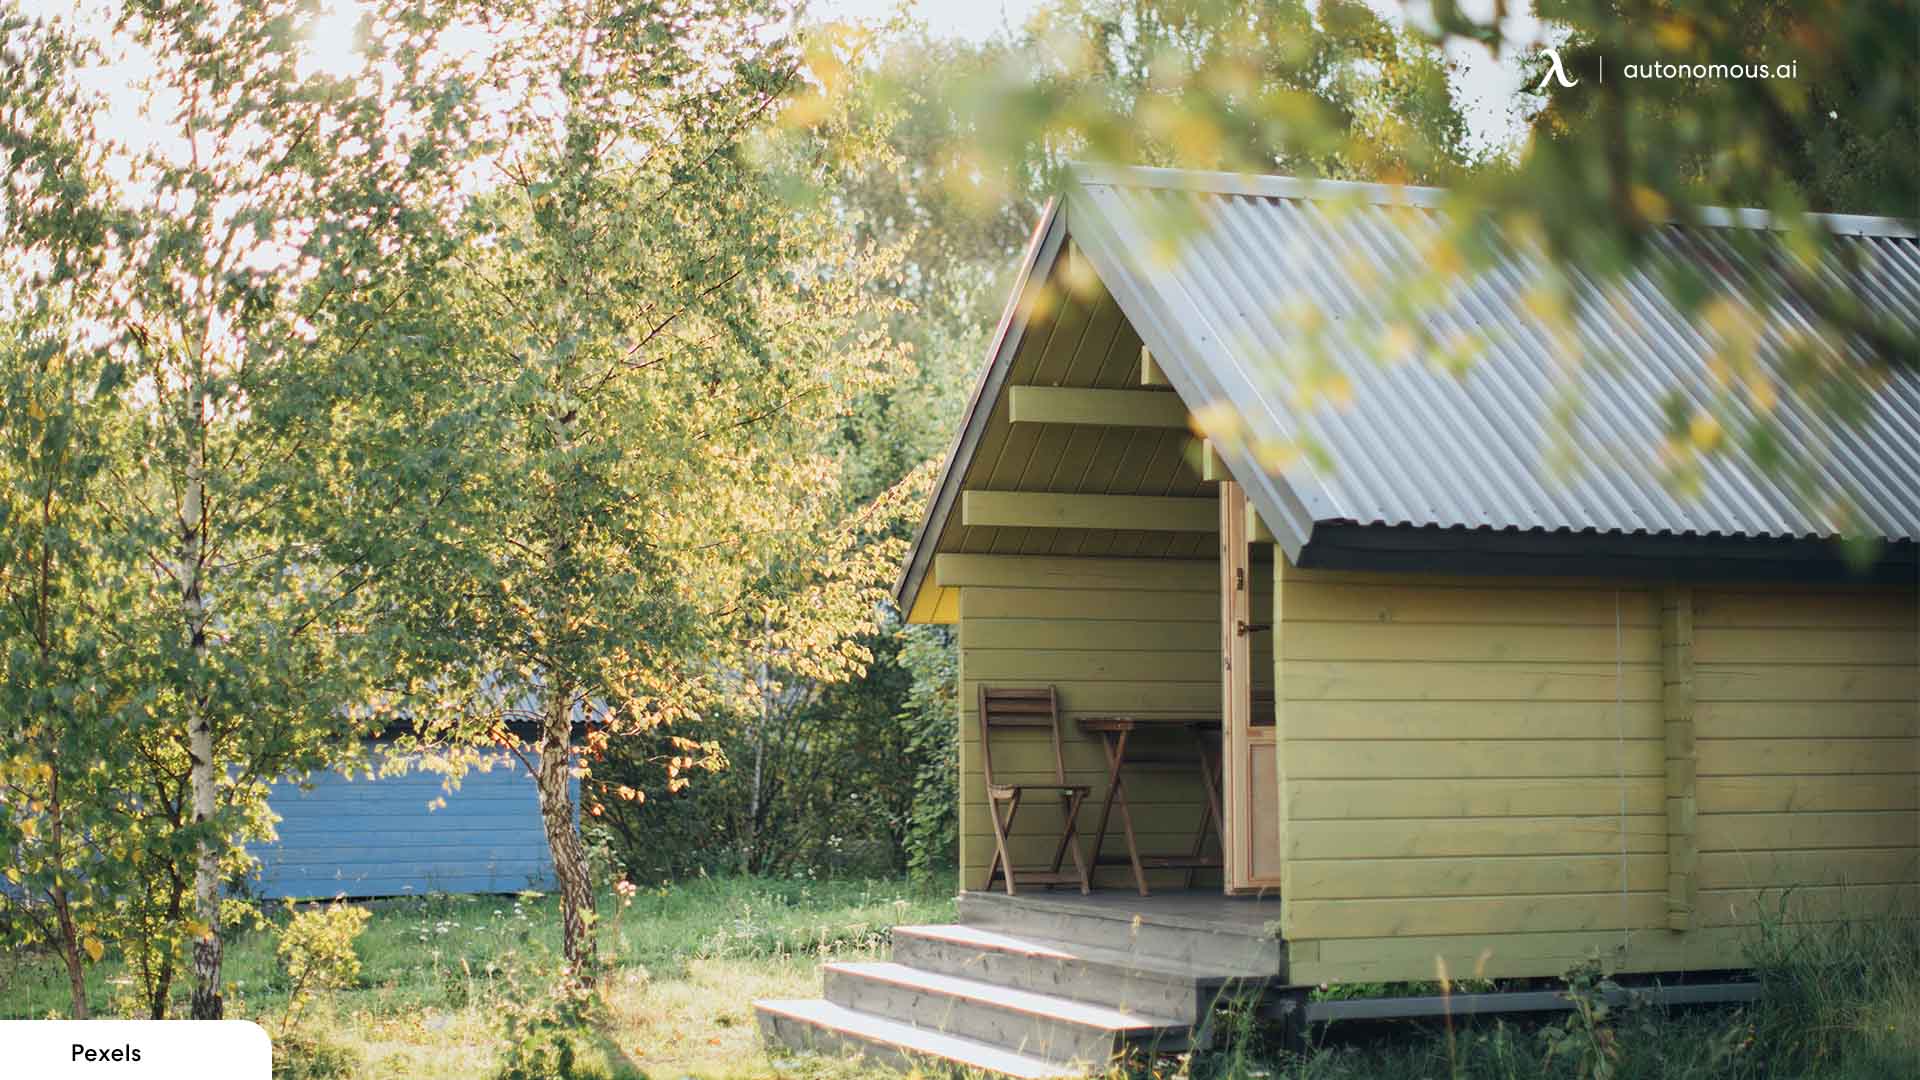 How to Build a Garden Office on a Budget? How Much Should You Spend?